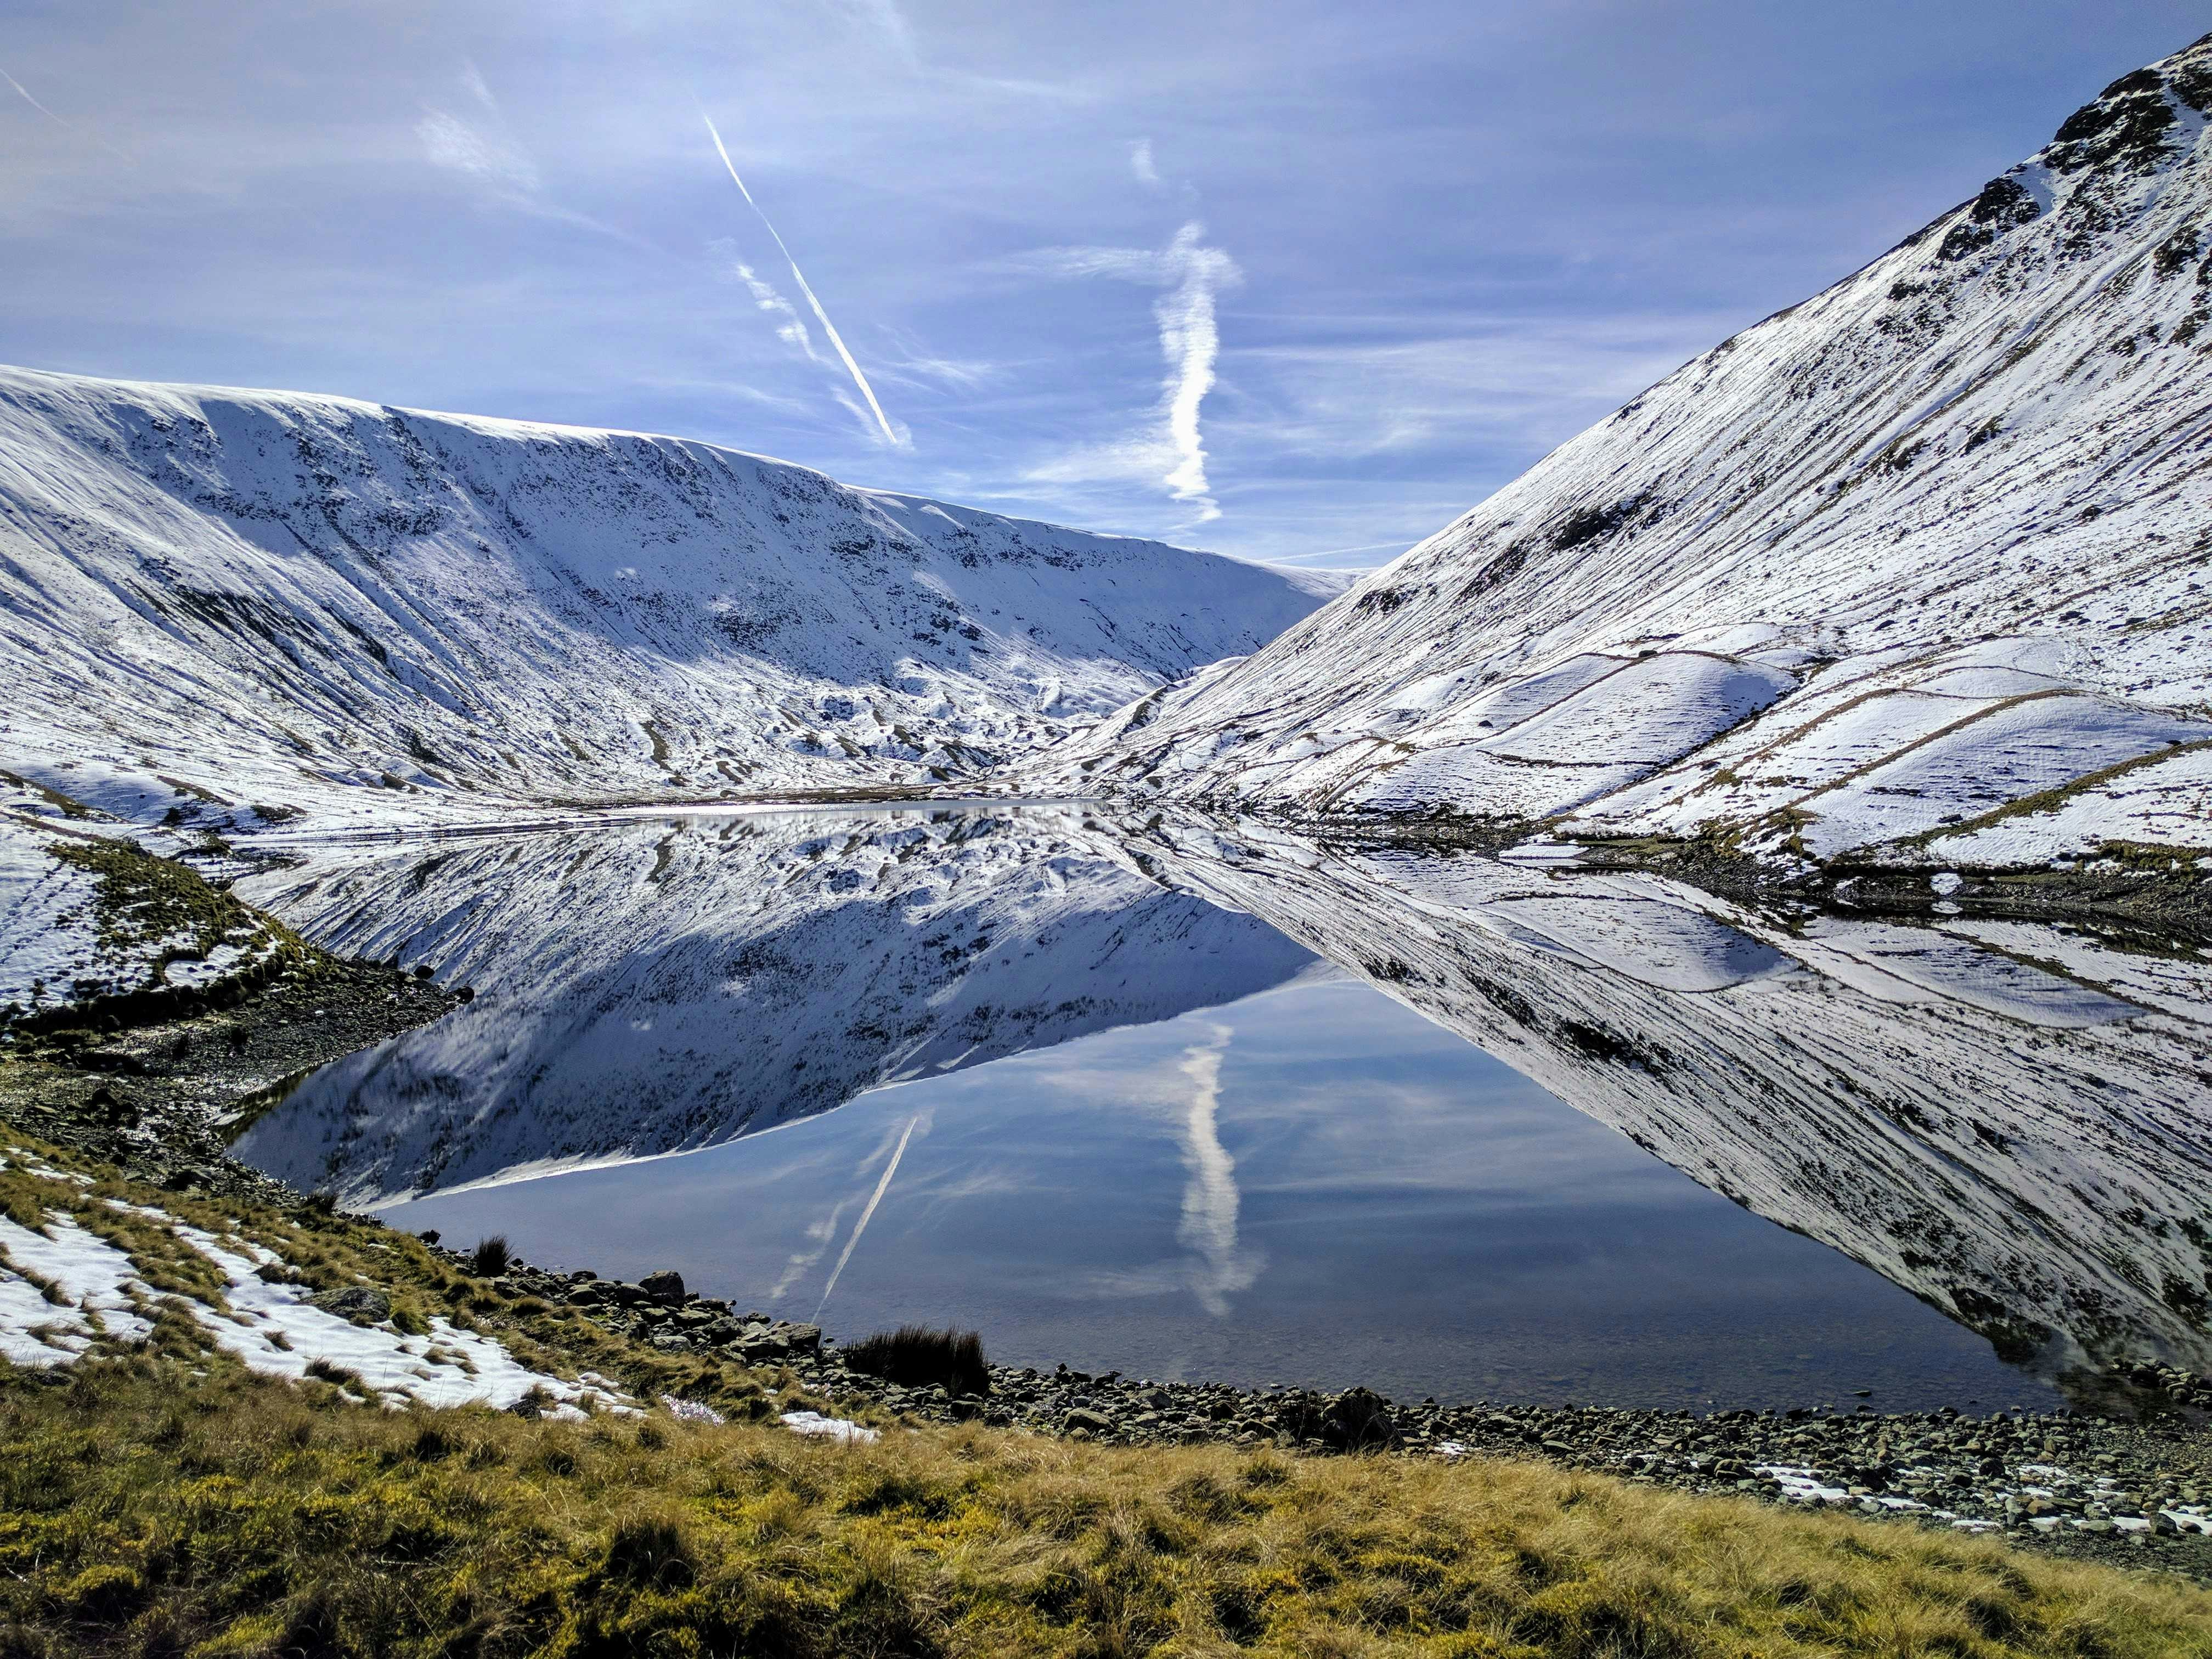 Glacial lakes and snowscapes of Hayeswater